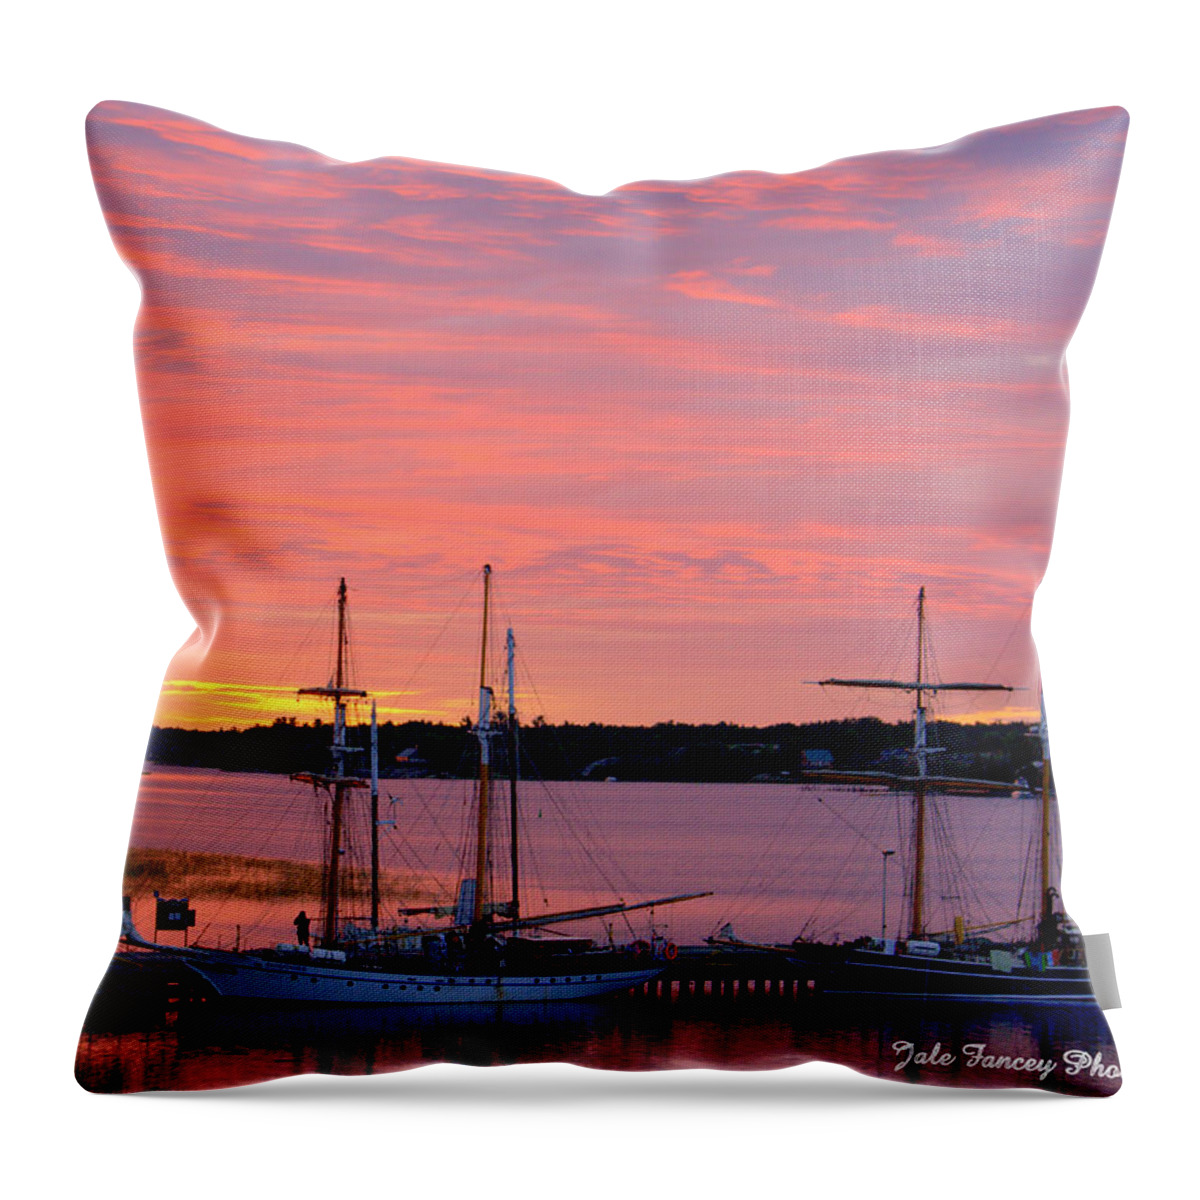 Red Throw Pillow featuring the photograph Glorious Sunrise by Jale Fancey